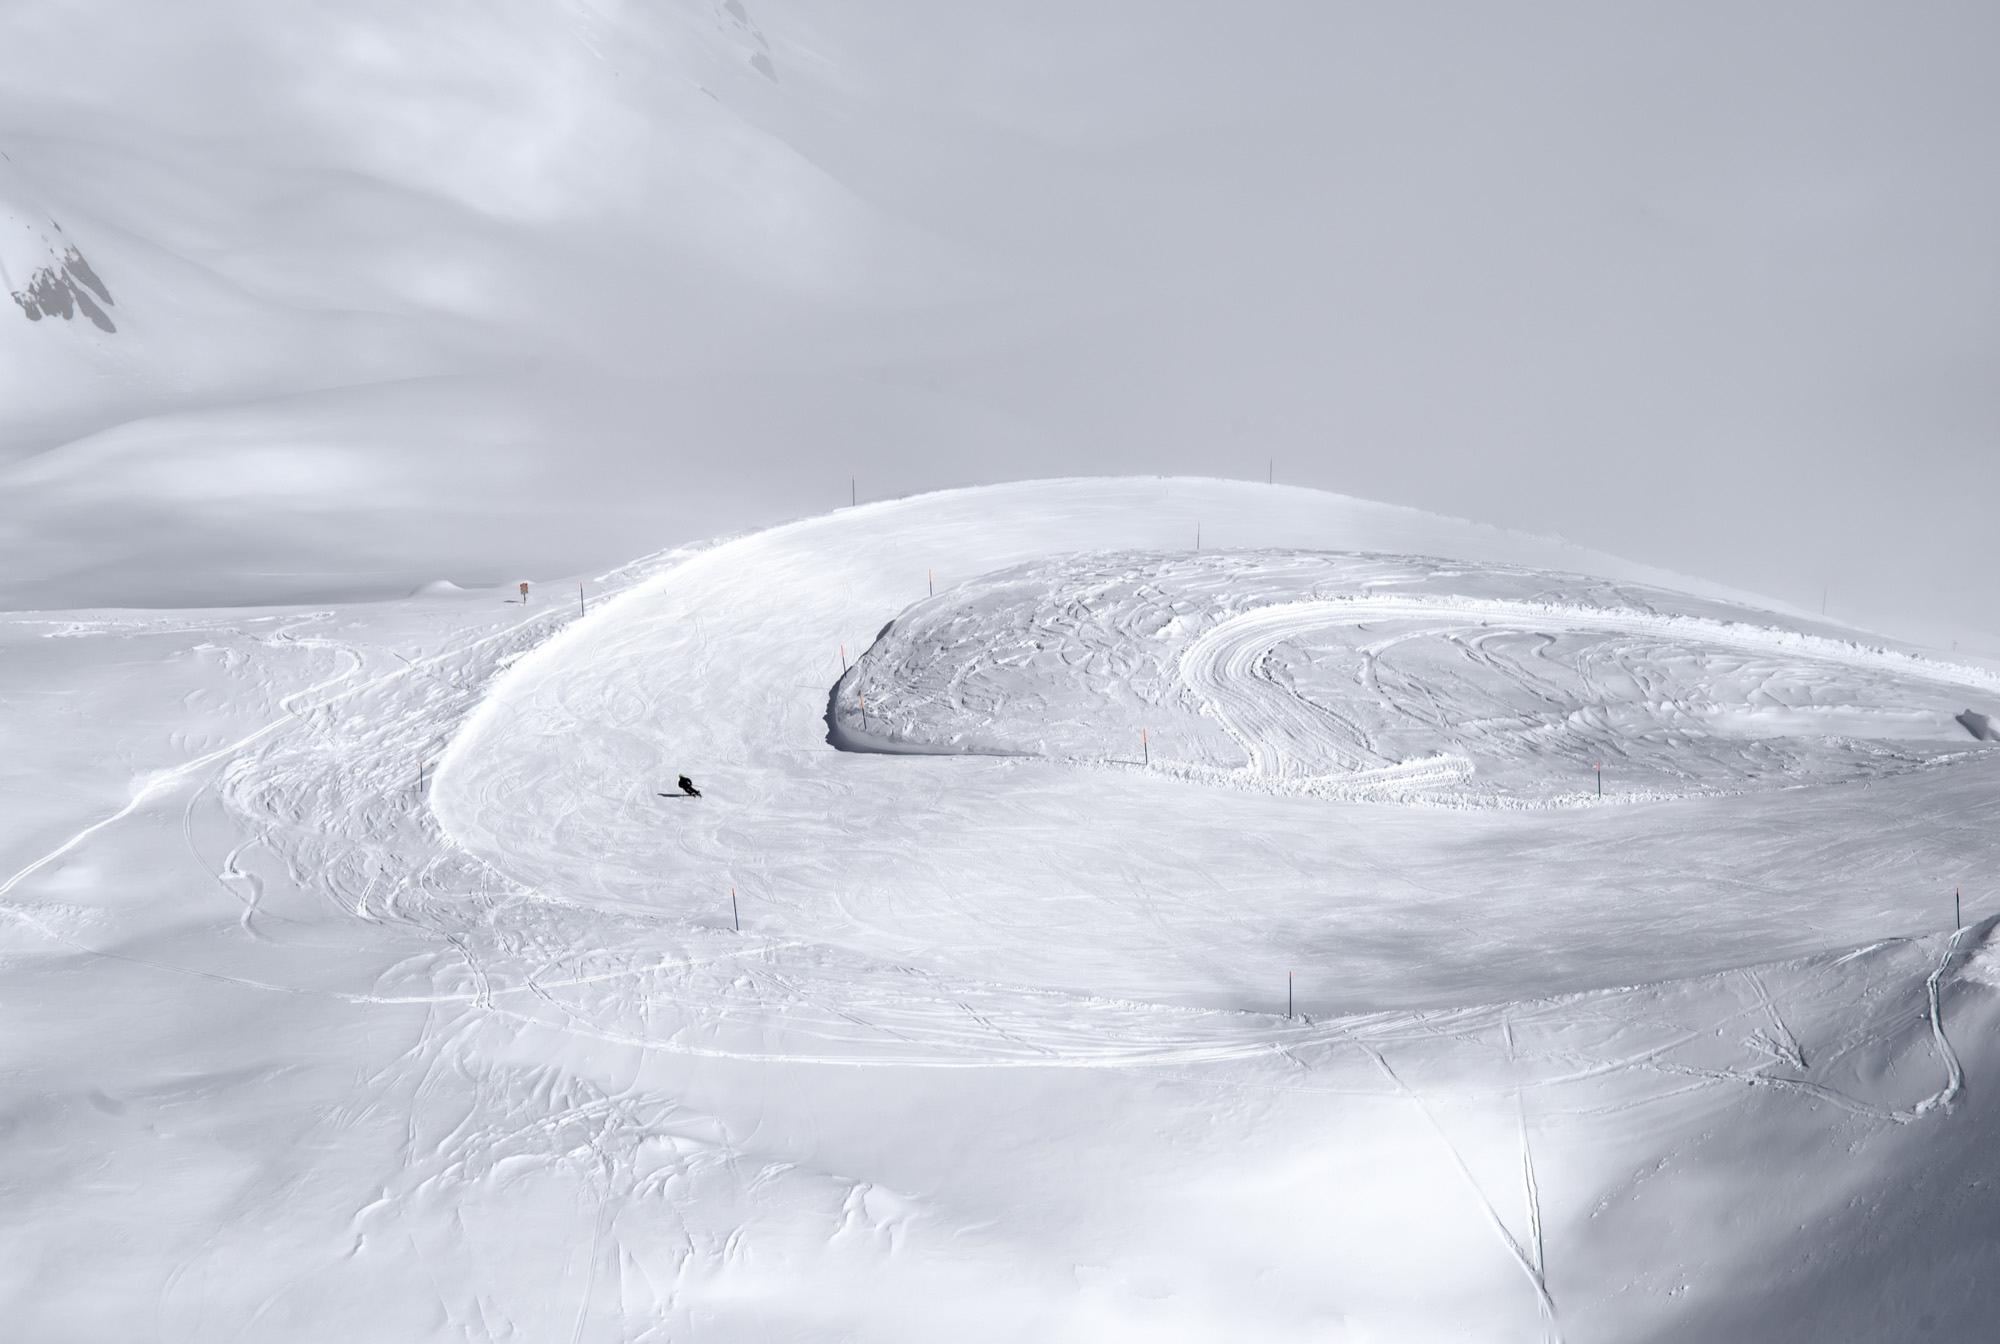 An arc formed by skis in fresh snow